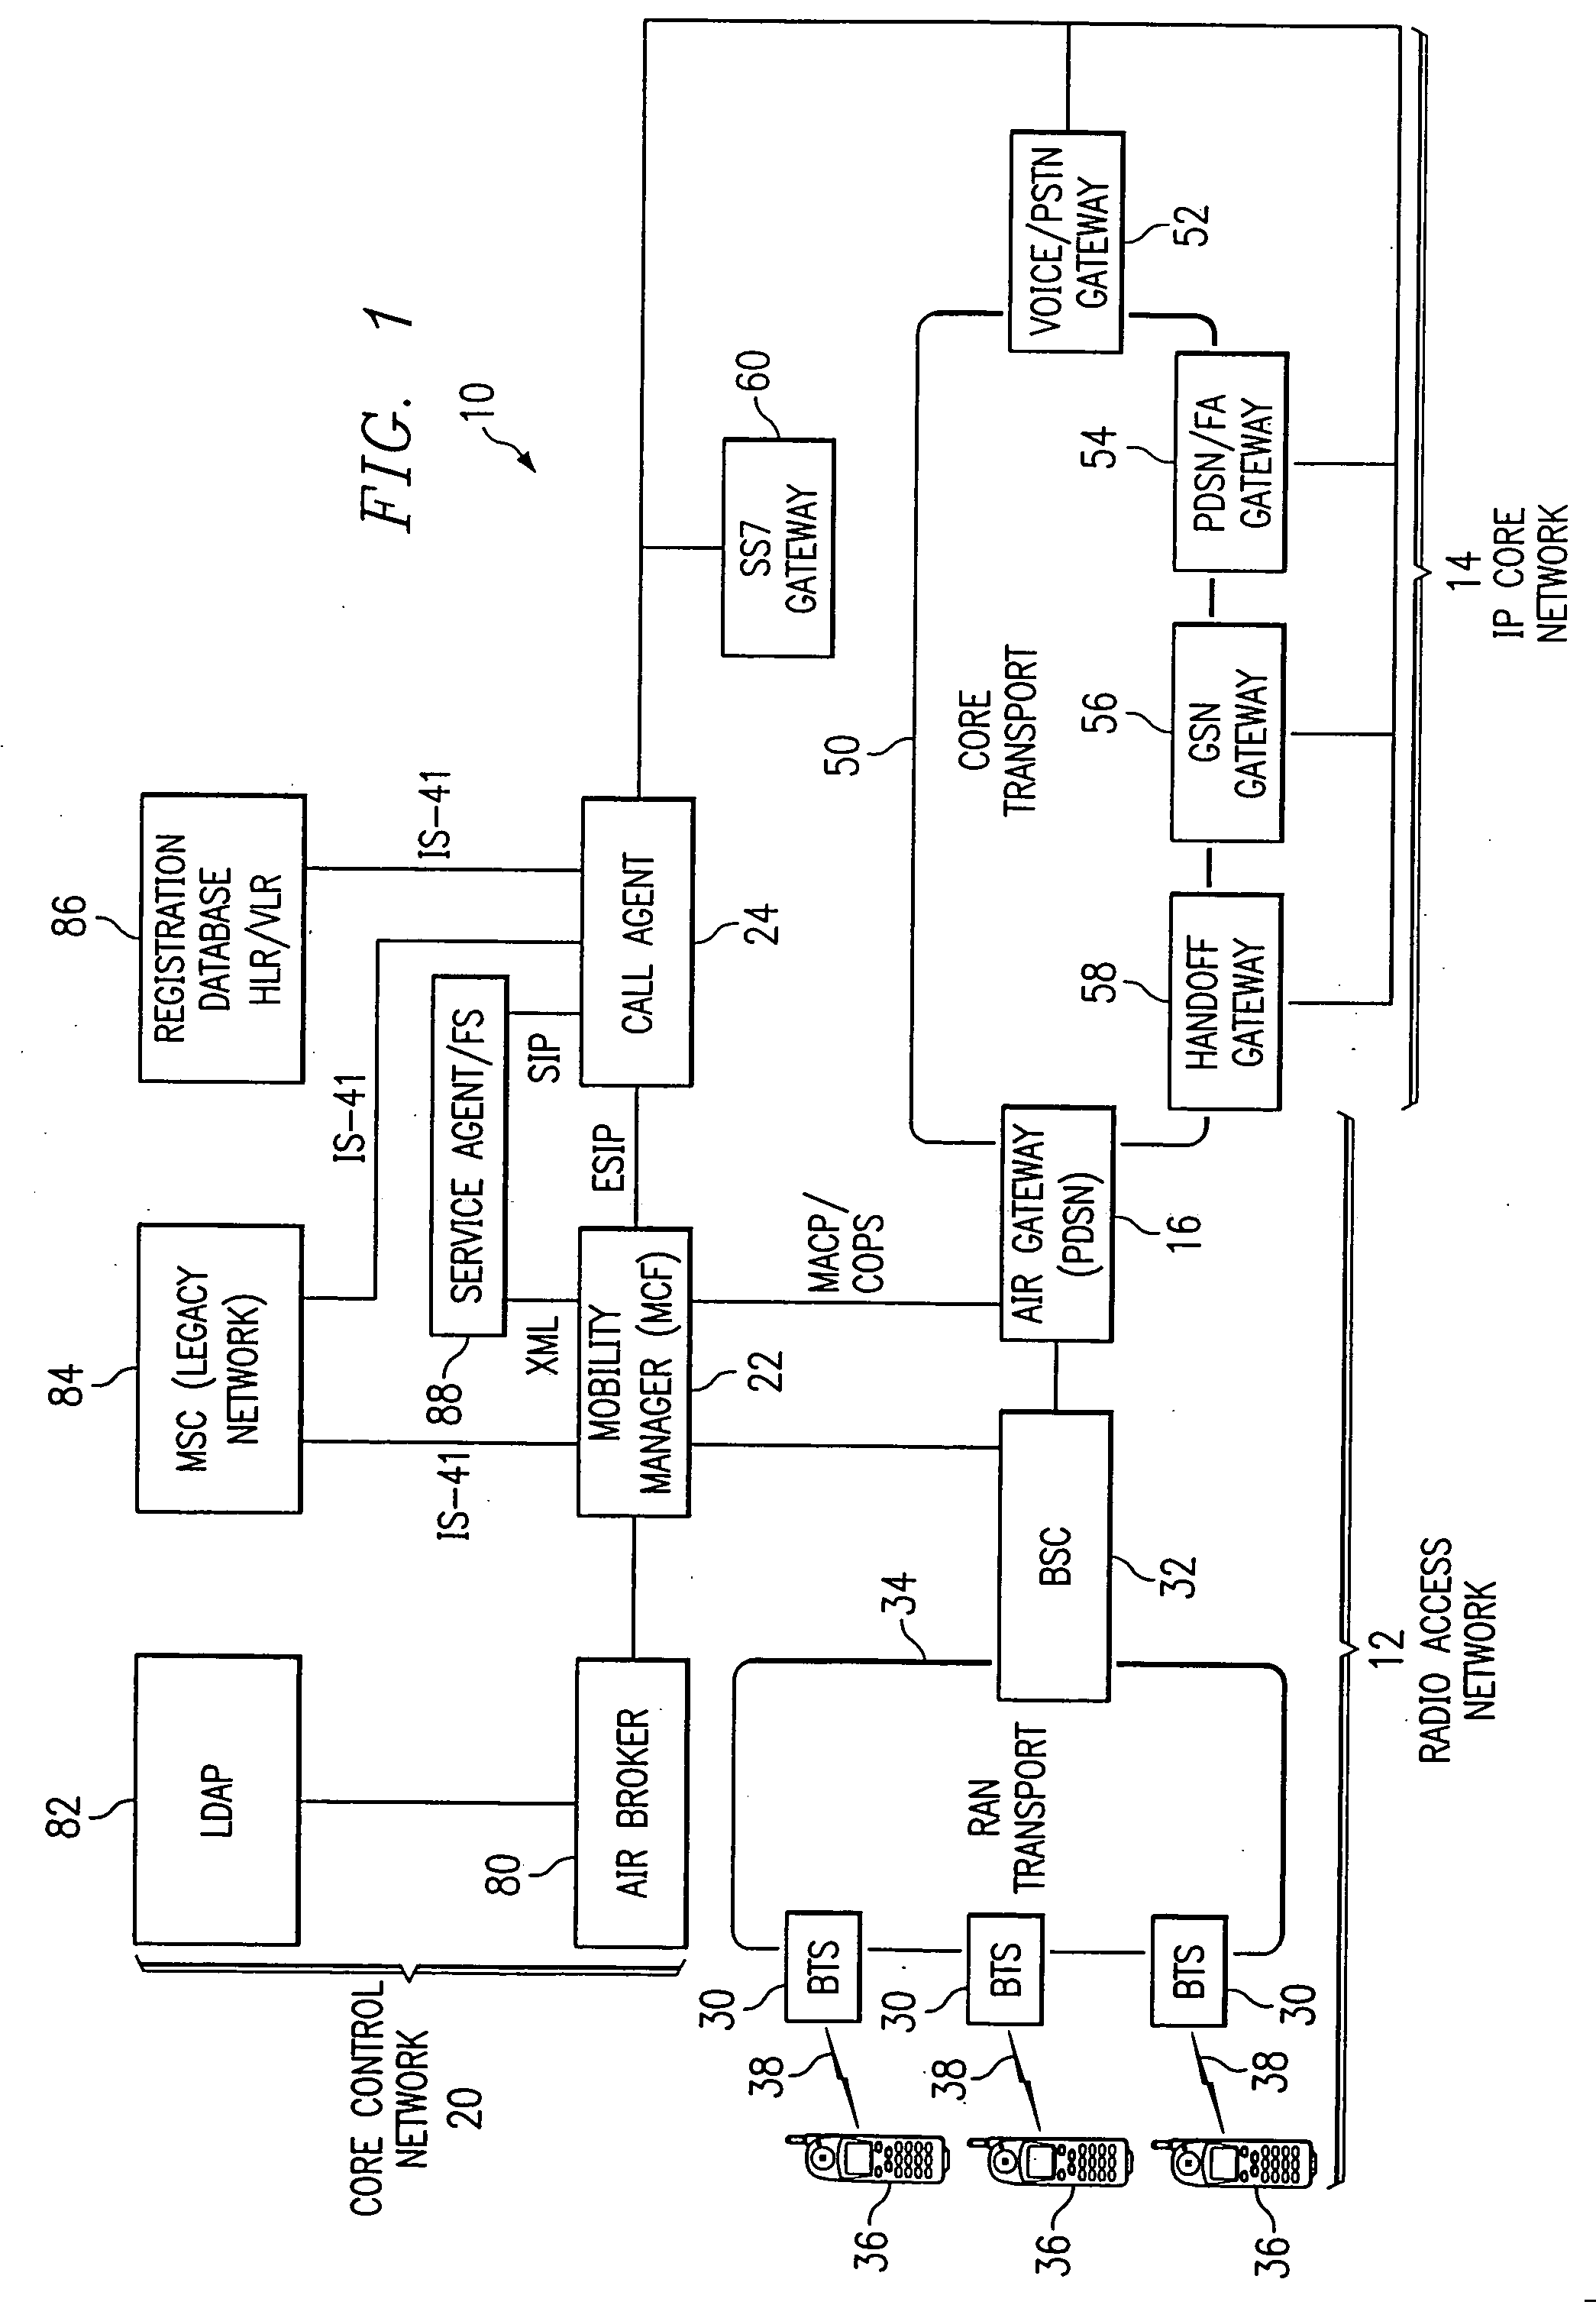 Method and system for providing wireless-specific services for a wireless access network